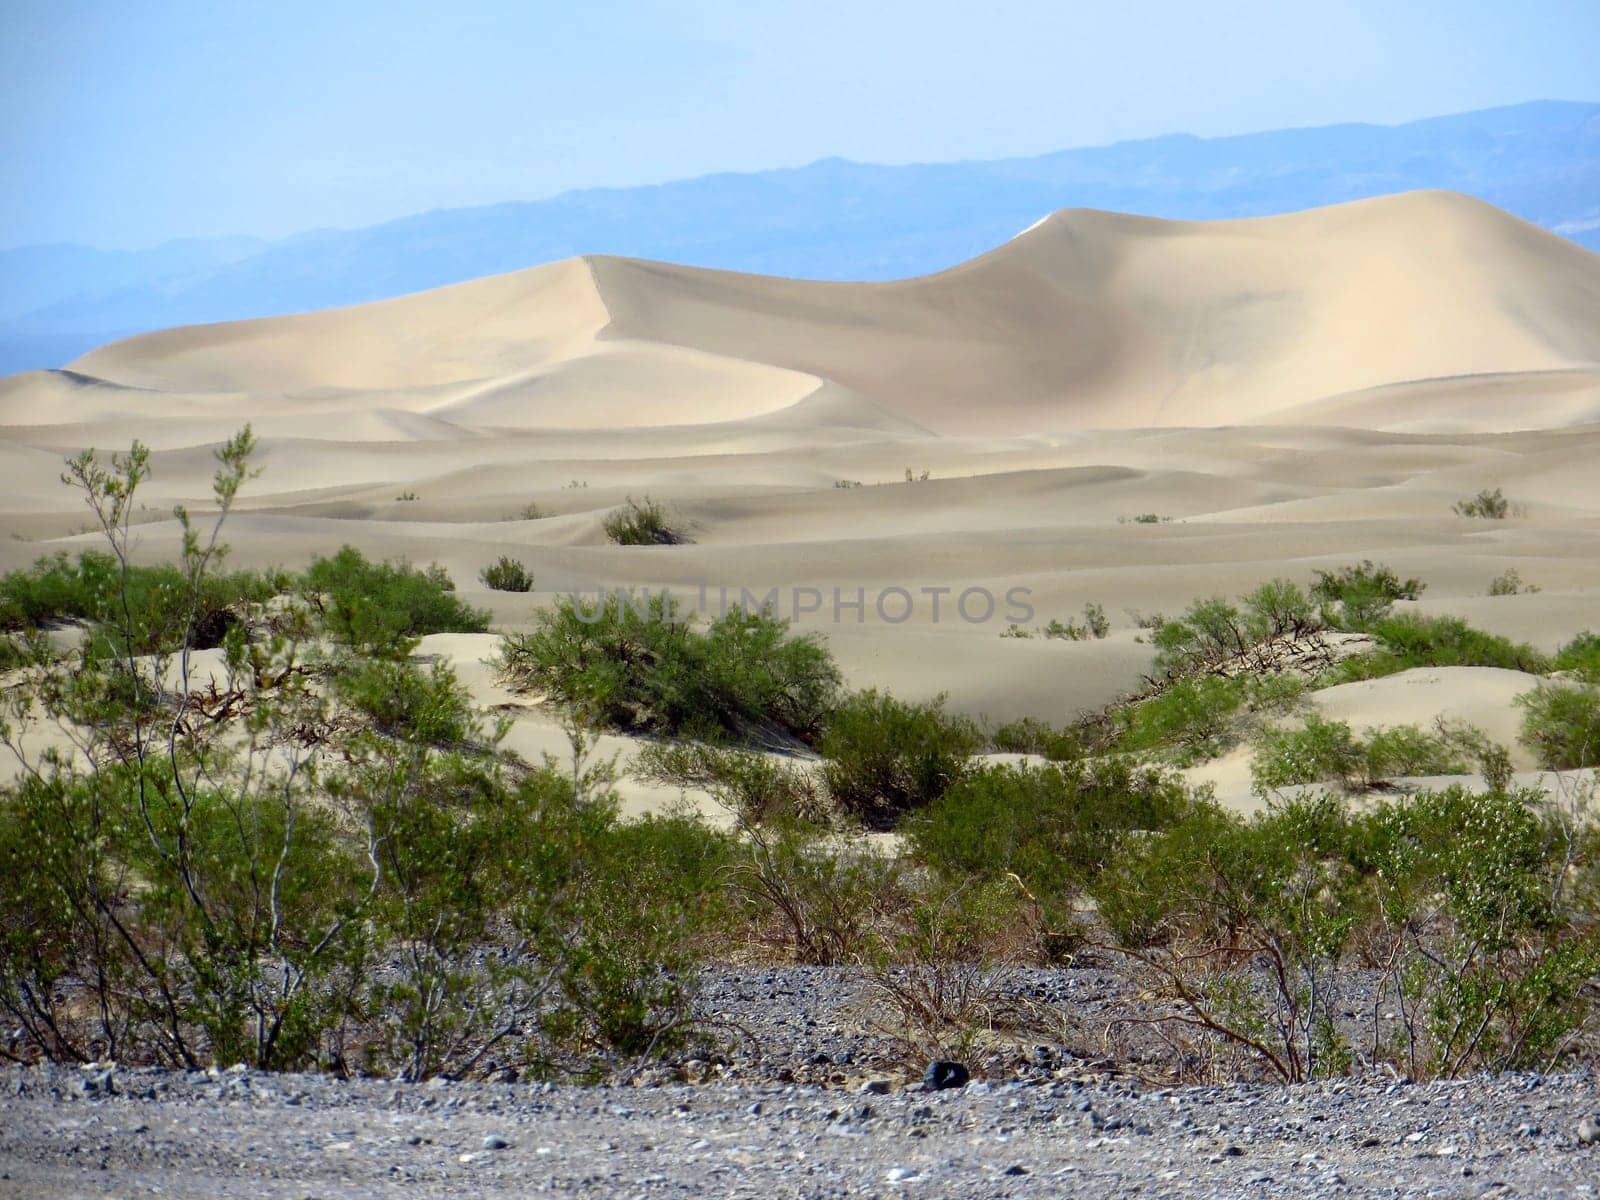 Mesquite Flat Sand Dunes in Death Valley National Park, California. High quality photo